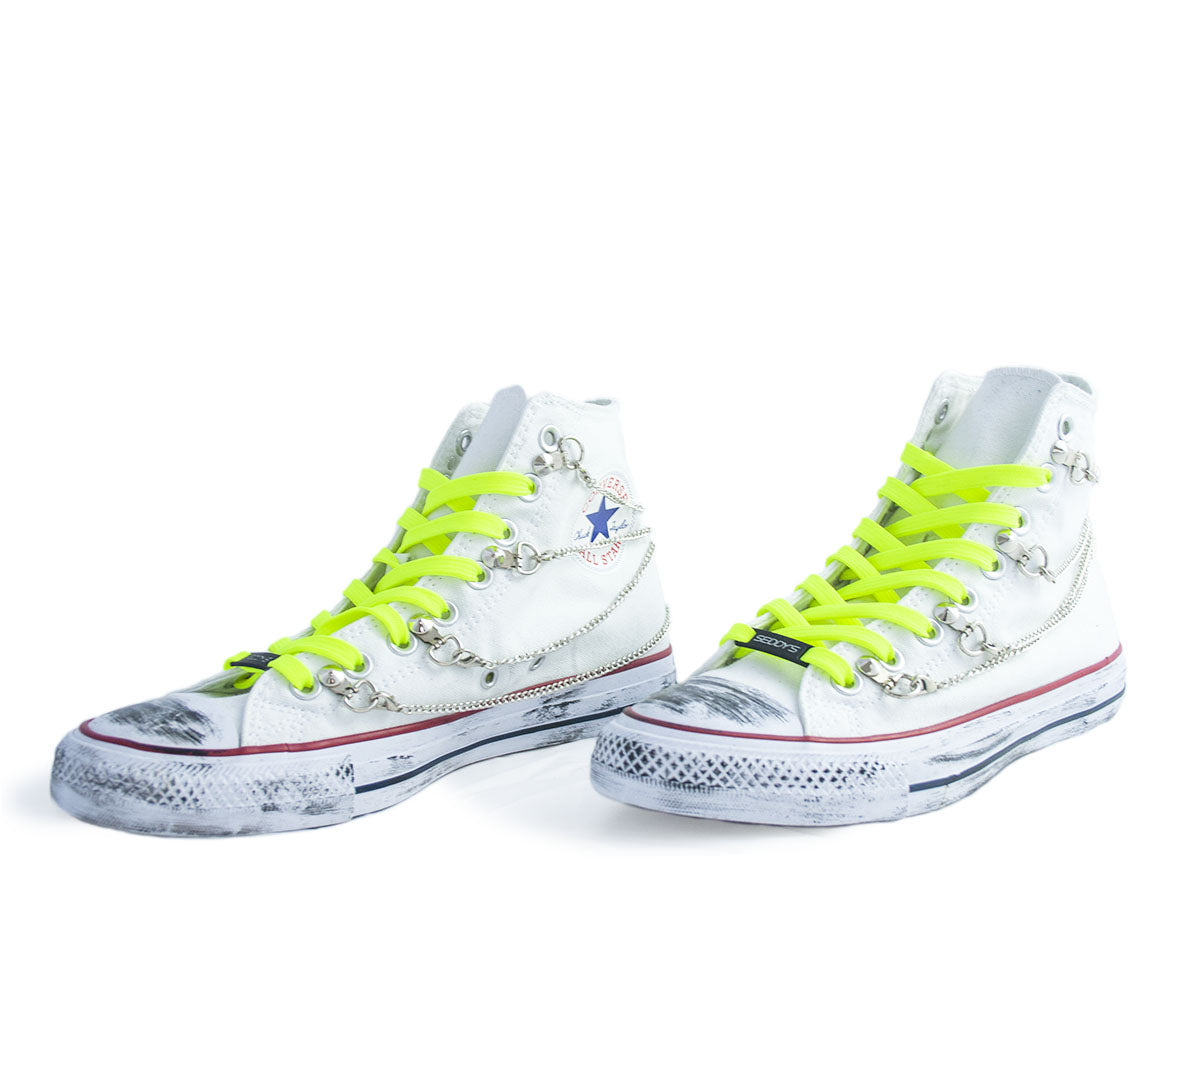 SEDDY'S Chains Converse Customized